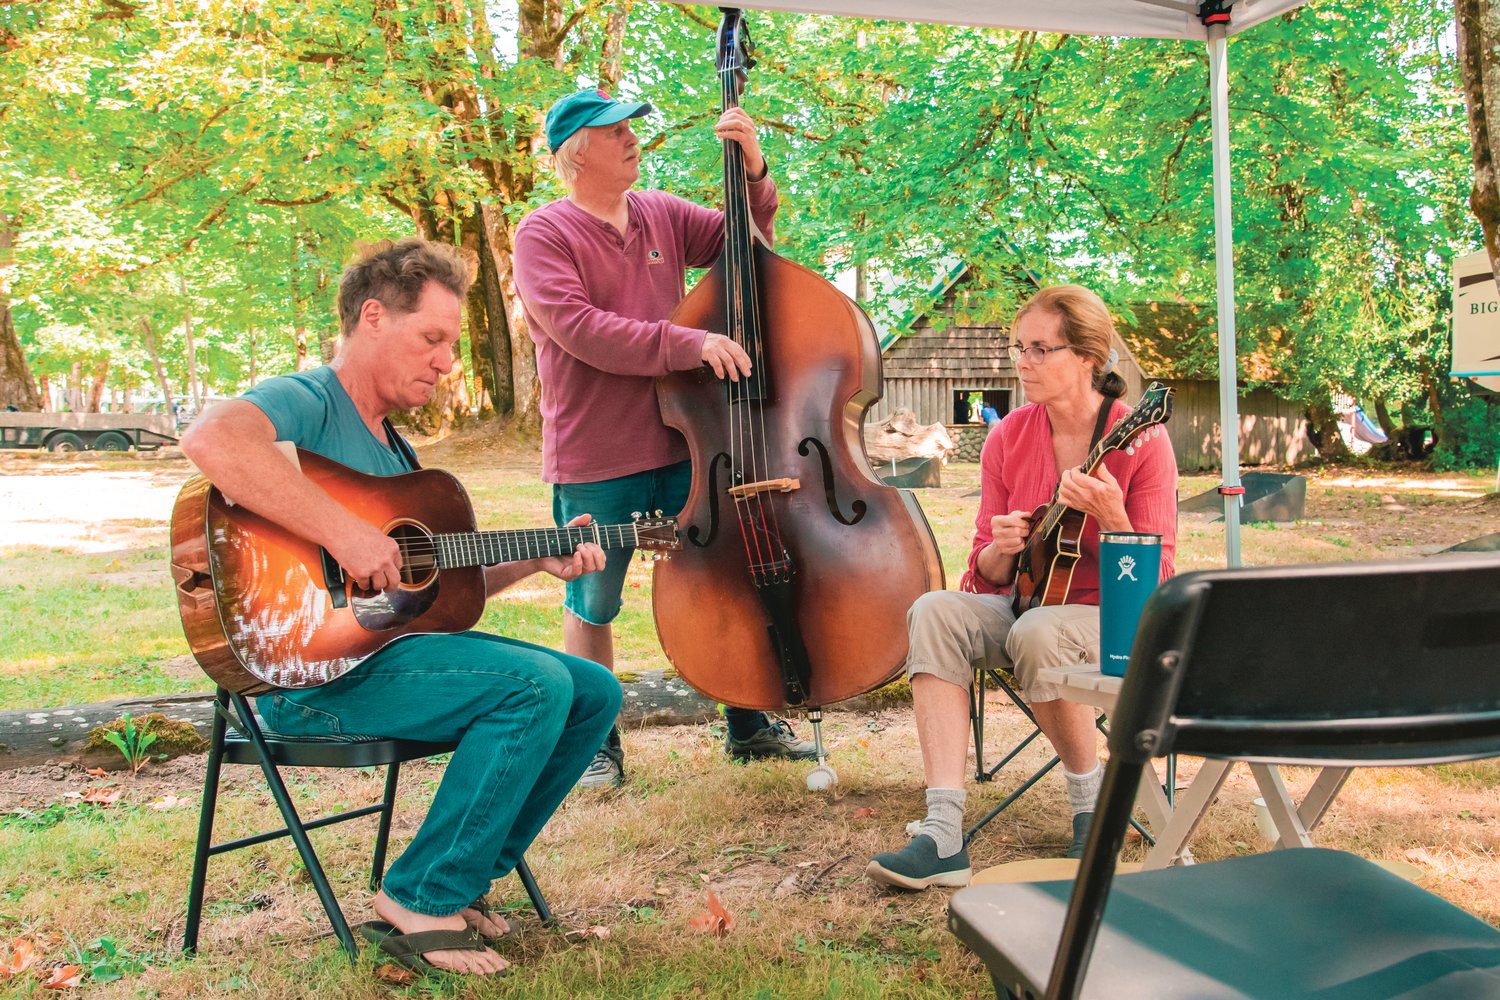 From left, Tried and Blue band members Jeff Rogell, Jeff Limbaugh, and Nancy Limbaugh play their instruments at Kemp Olsen Memorial Park during the Mount St. Helens Bluegrass Festival in Toledo in 2021.